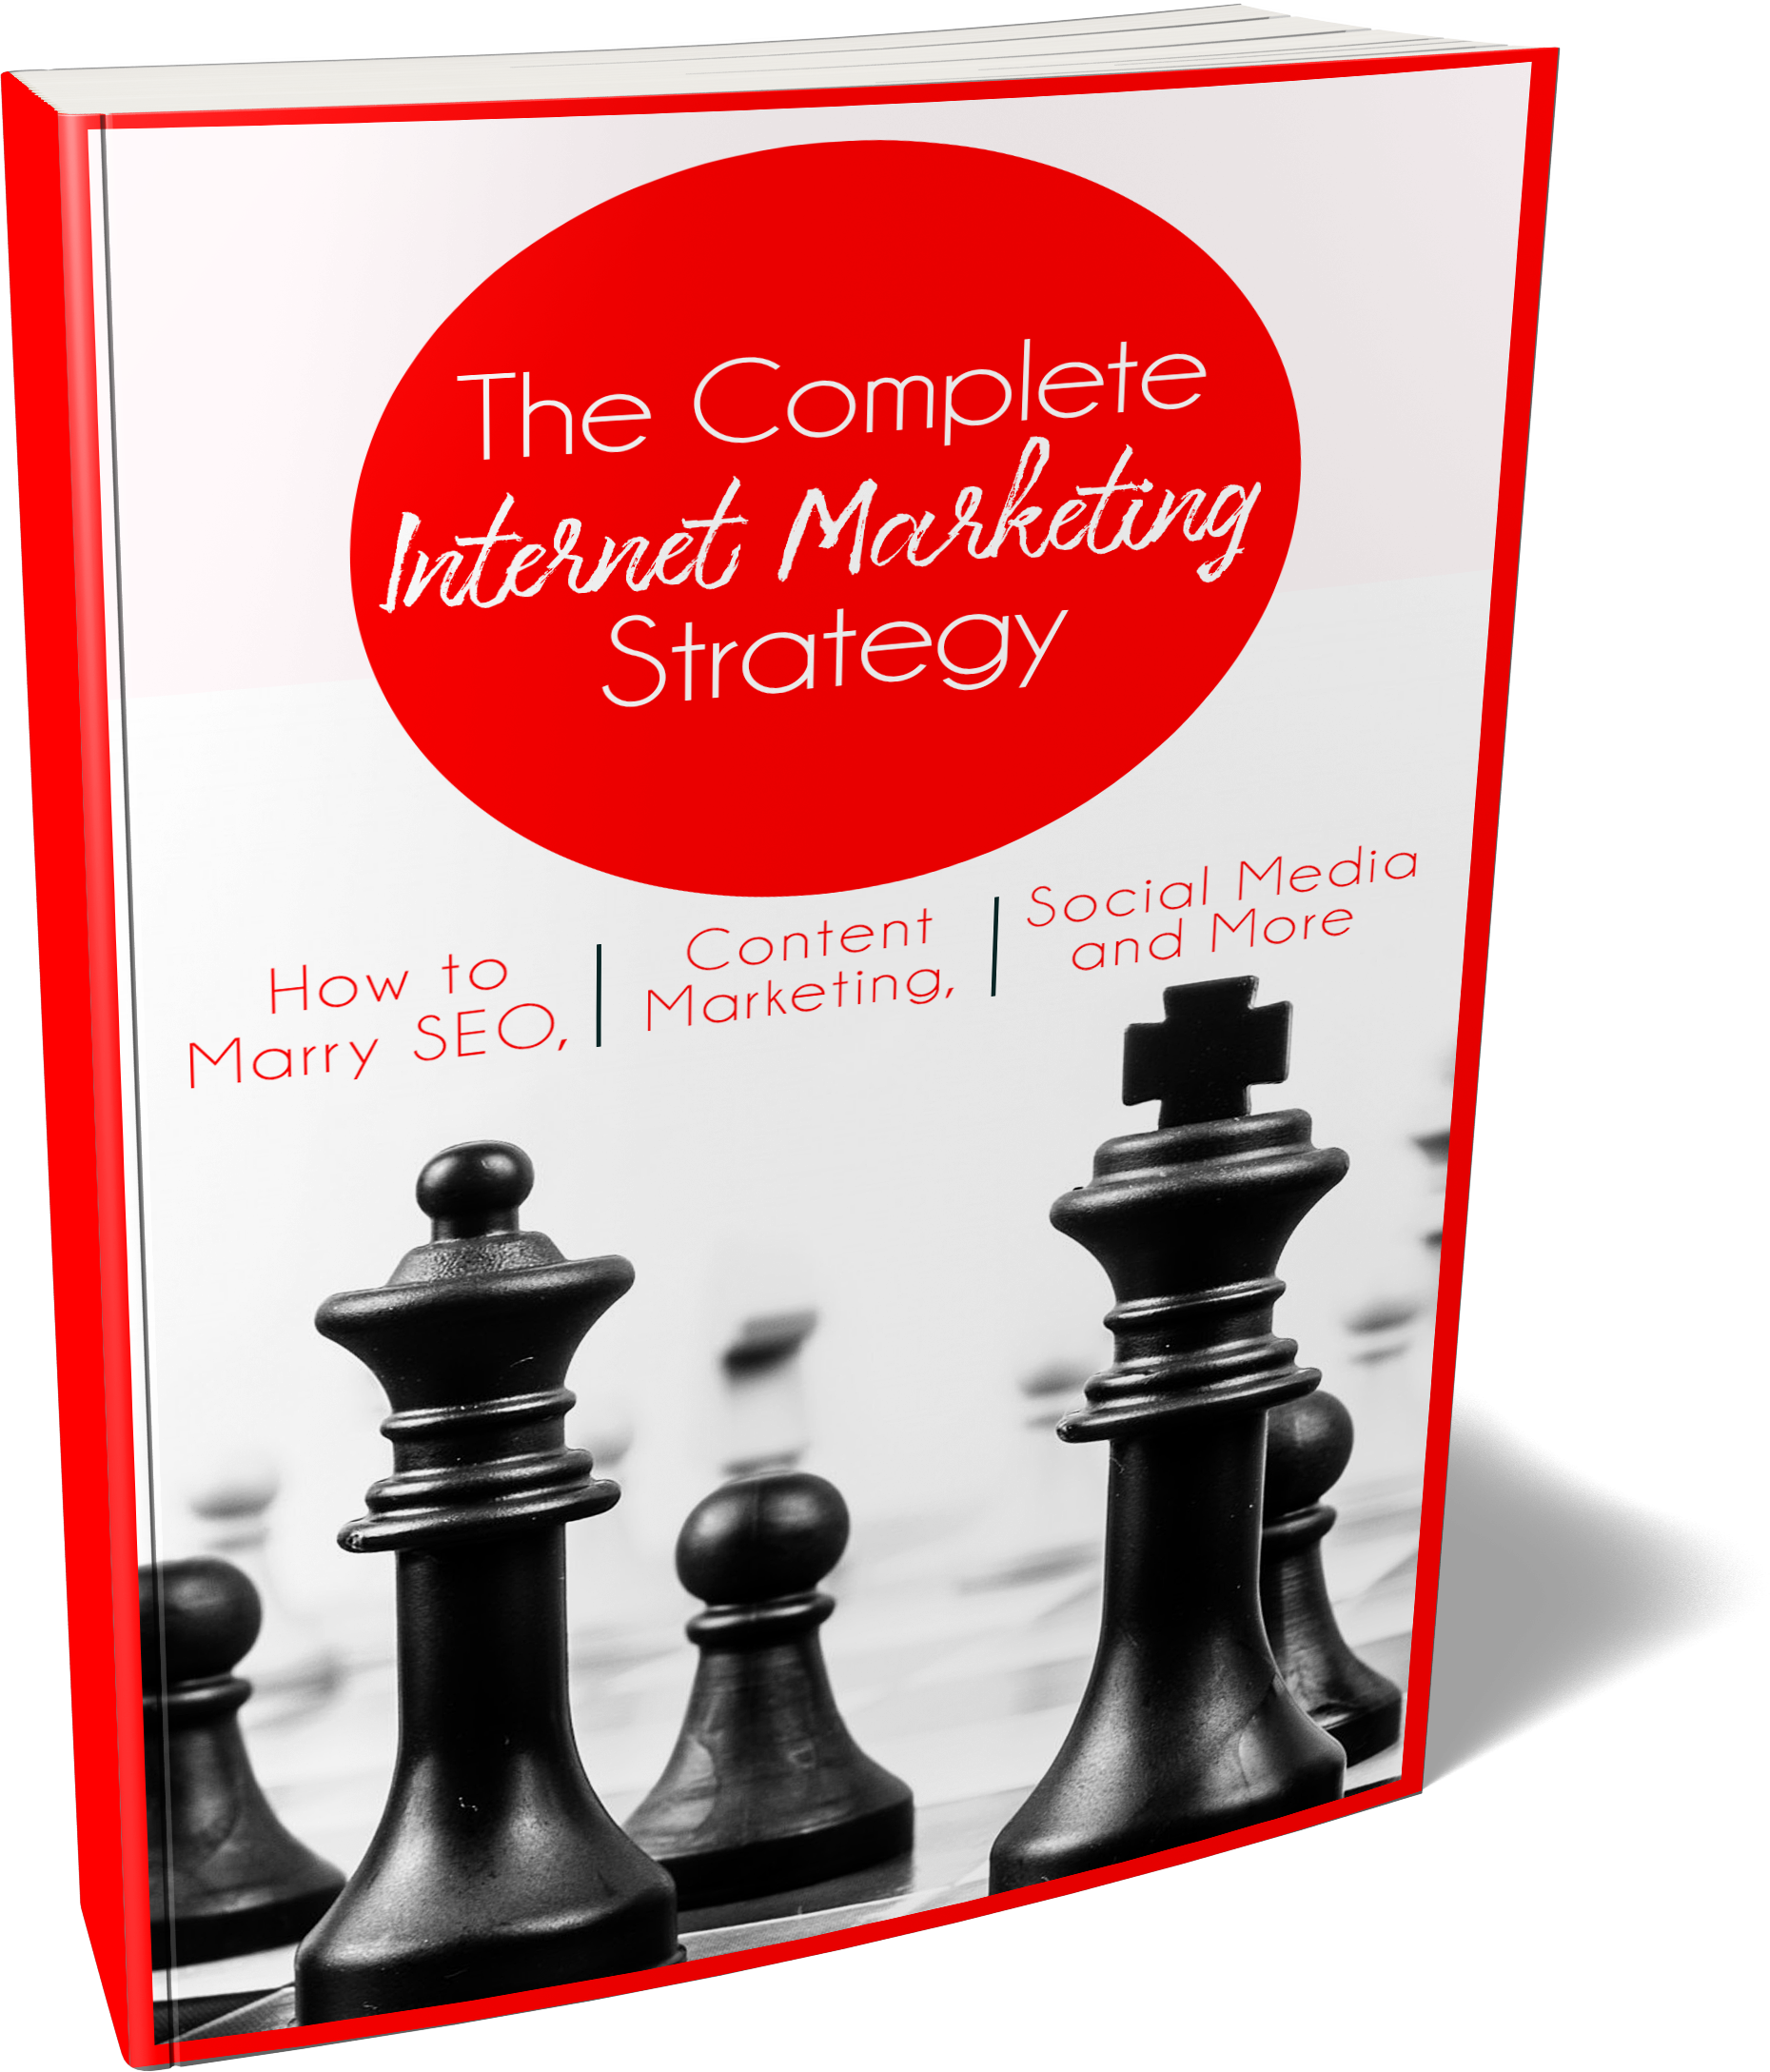 The Complete IM Strategy Ebook